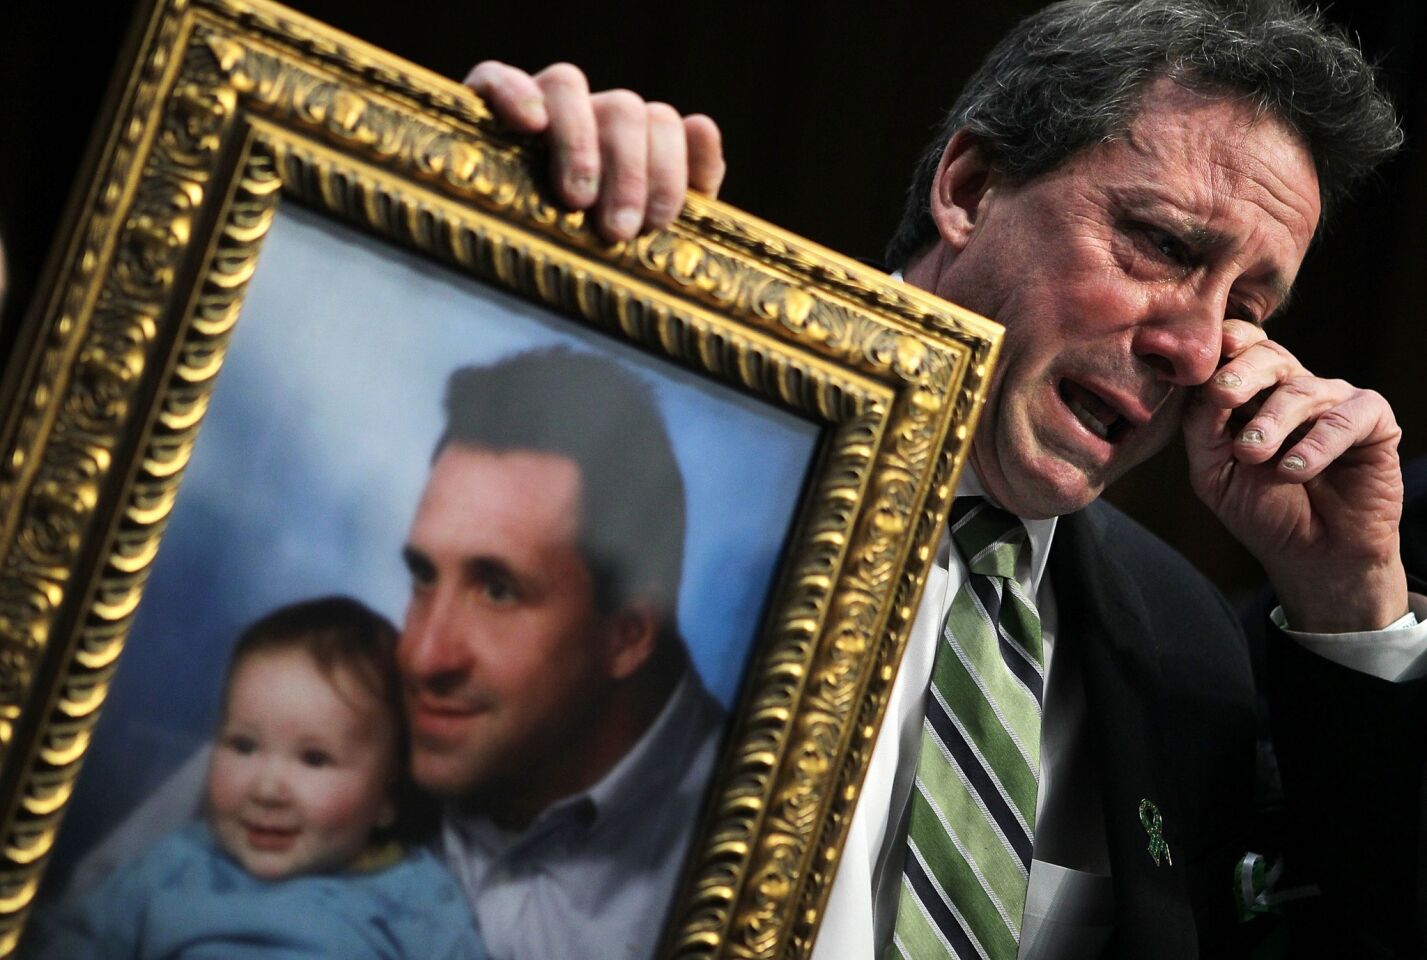 Neil Heslin, father of 6-year-old Sandy Hook Elementary School shooting victim Jesse Lewis, wipes away tears as he testifies during a hearing before the Senate Judiciary Committee on Capitol Hill.